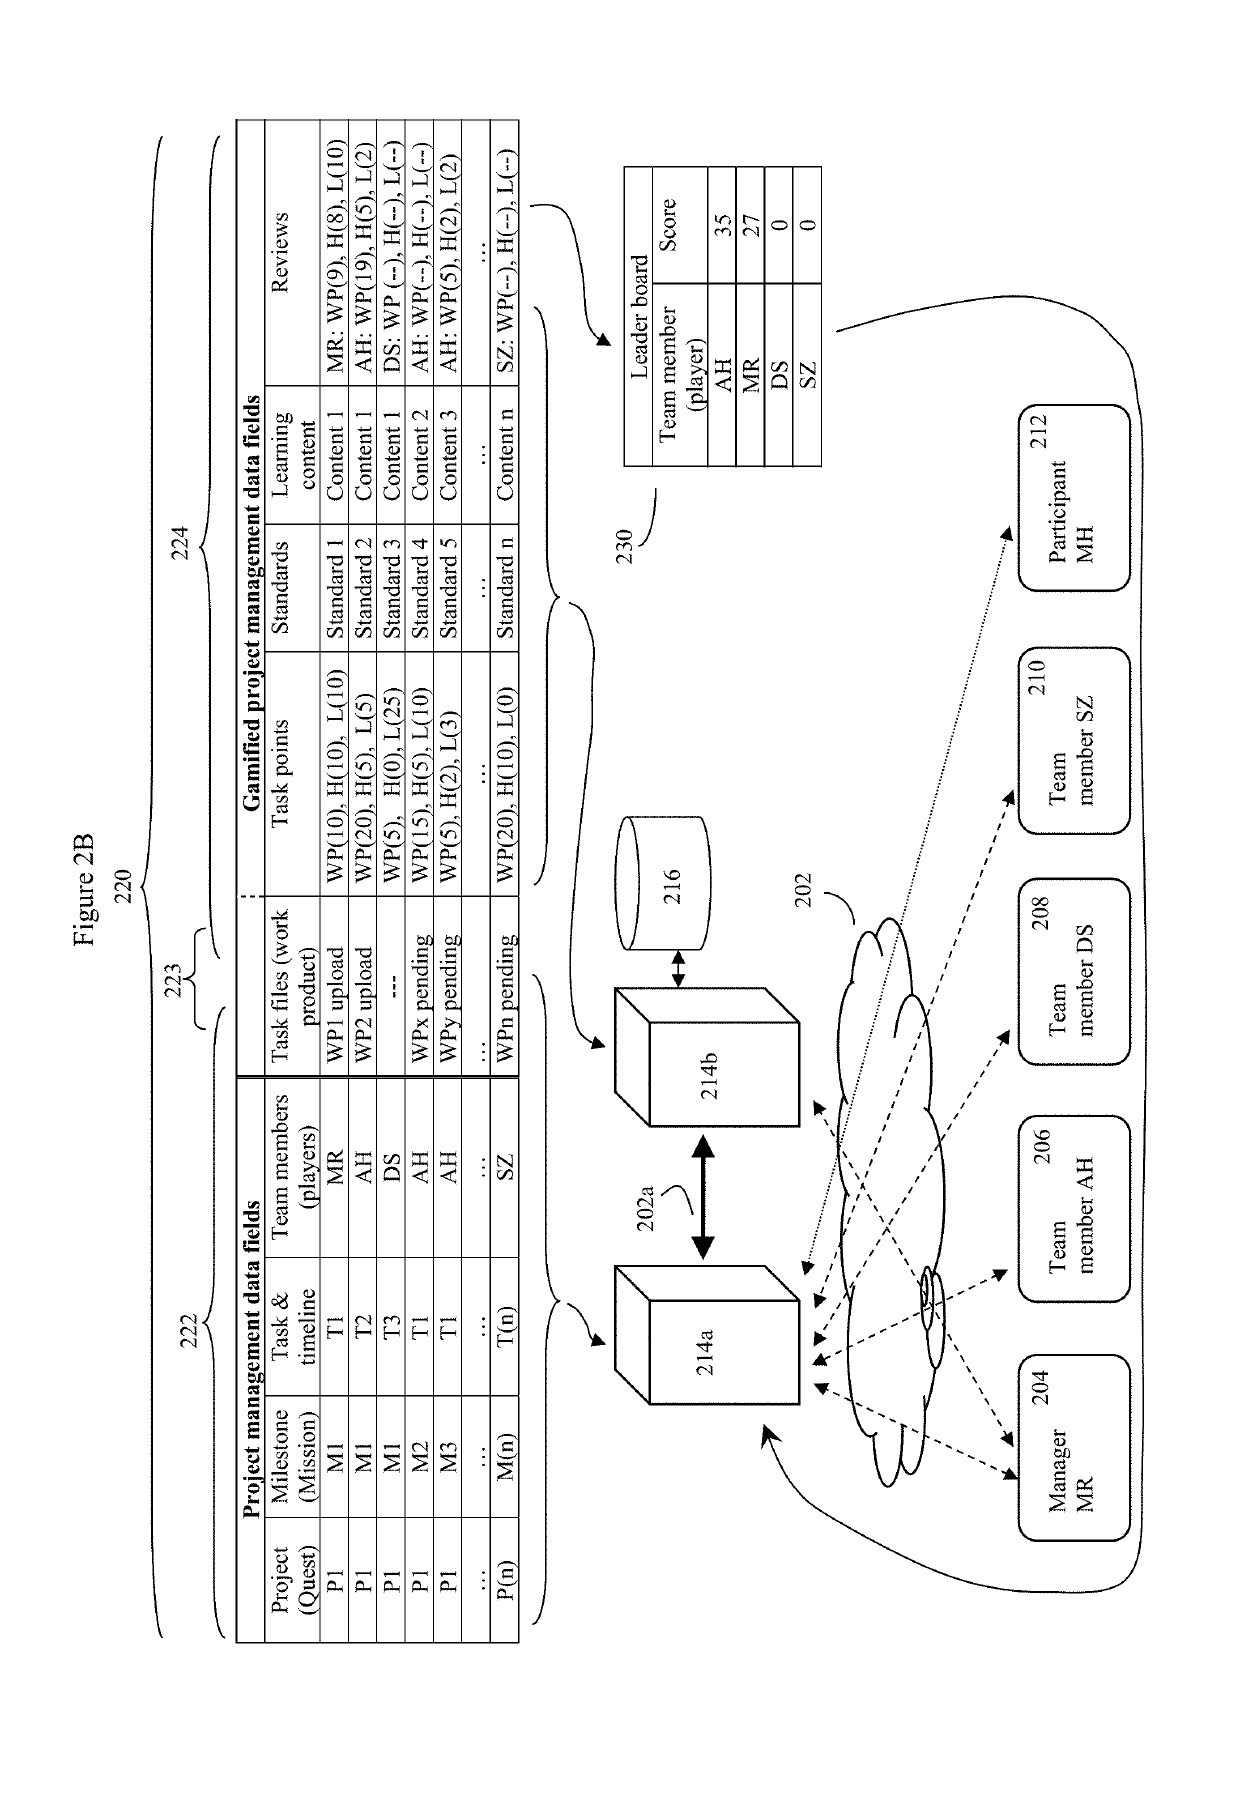 Gamified project management system and method